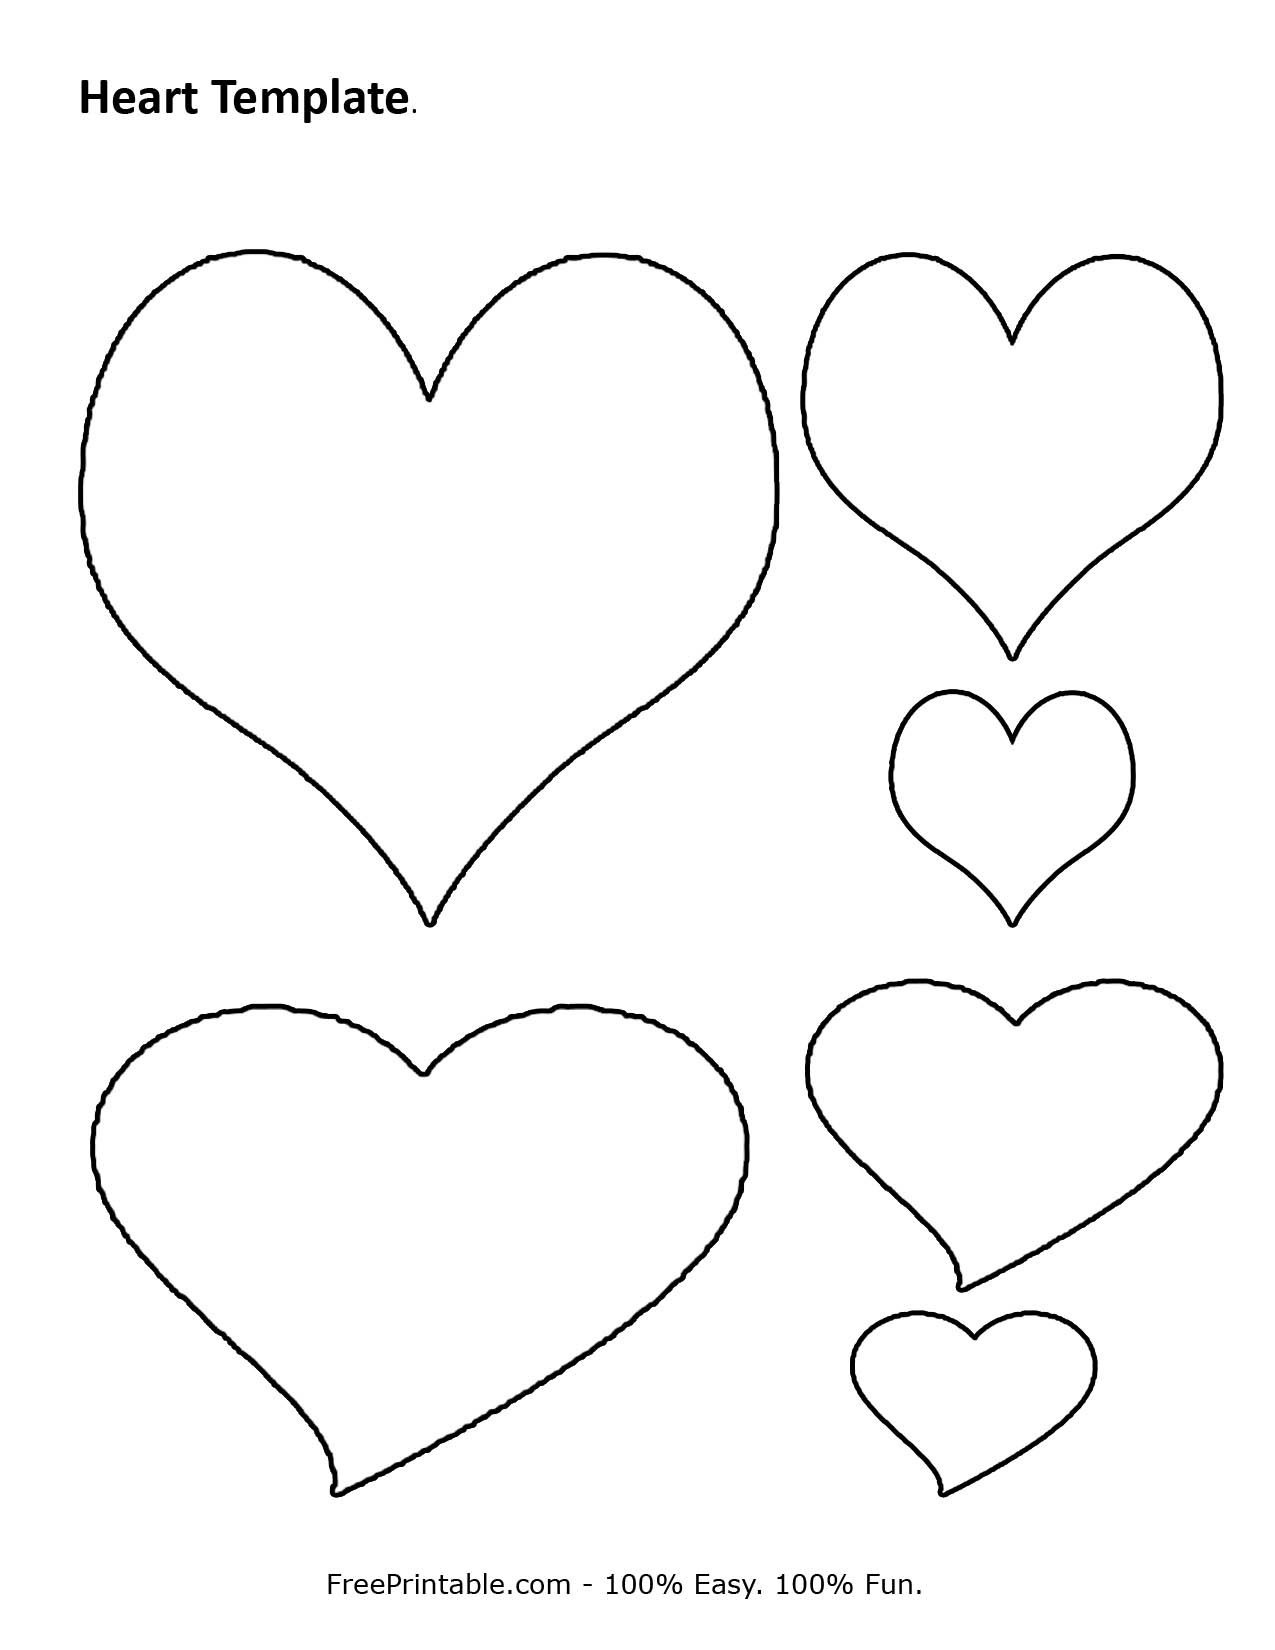 Free Printable Heart Template | Cupid Has A Heart On | Heart - Free Printable Pictures Of Cupid